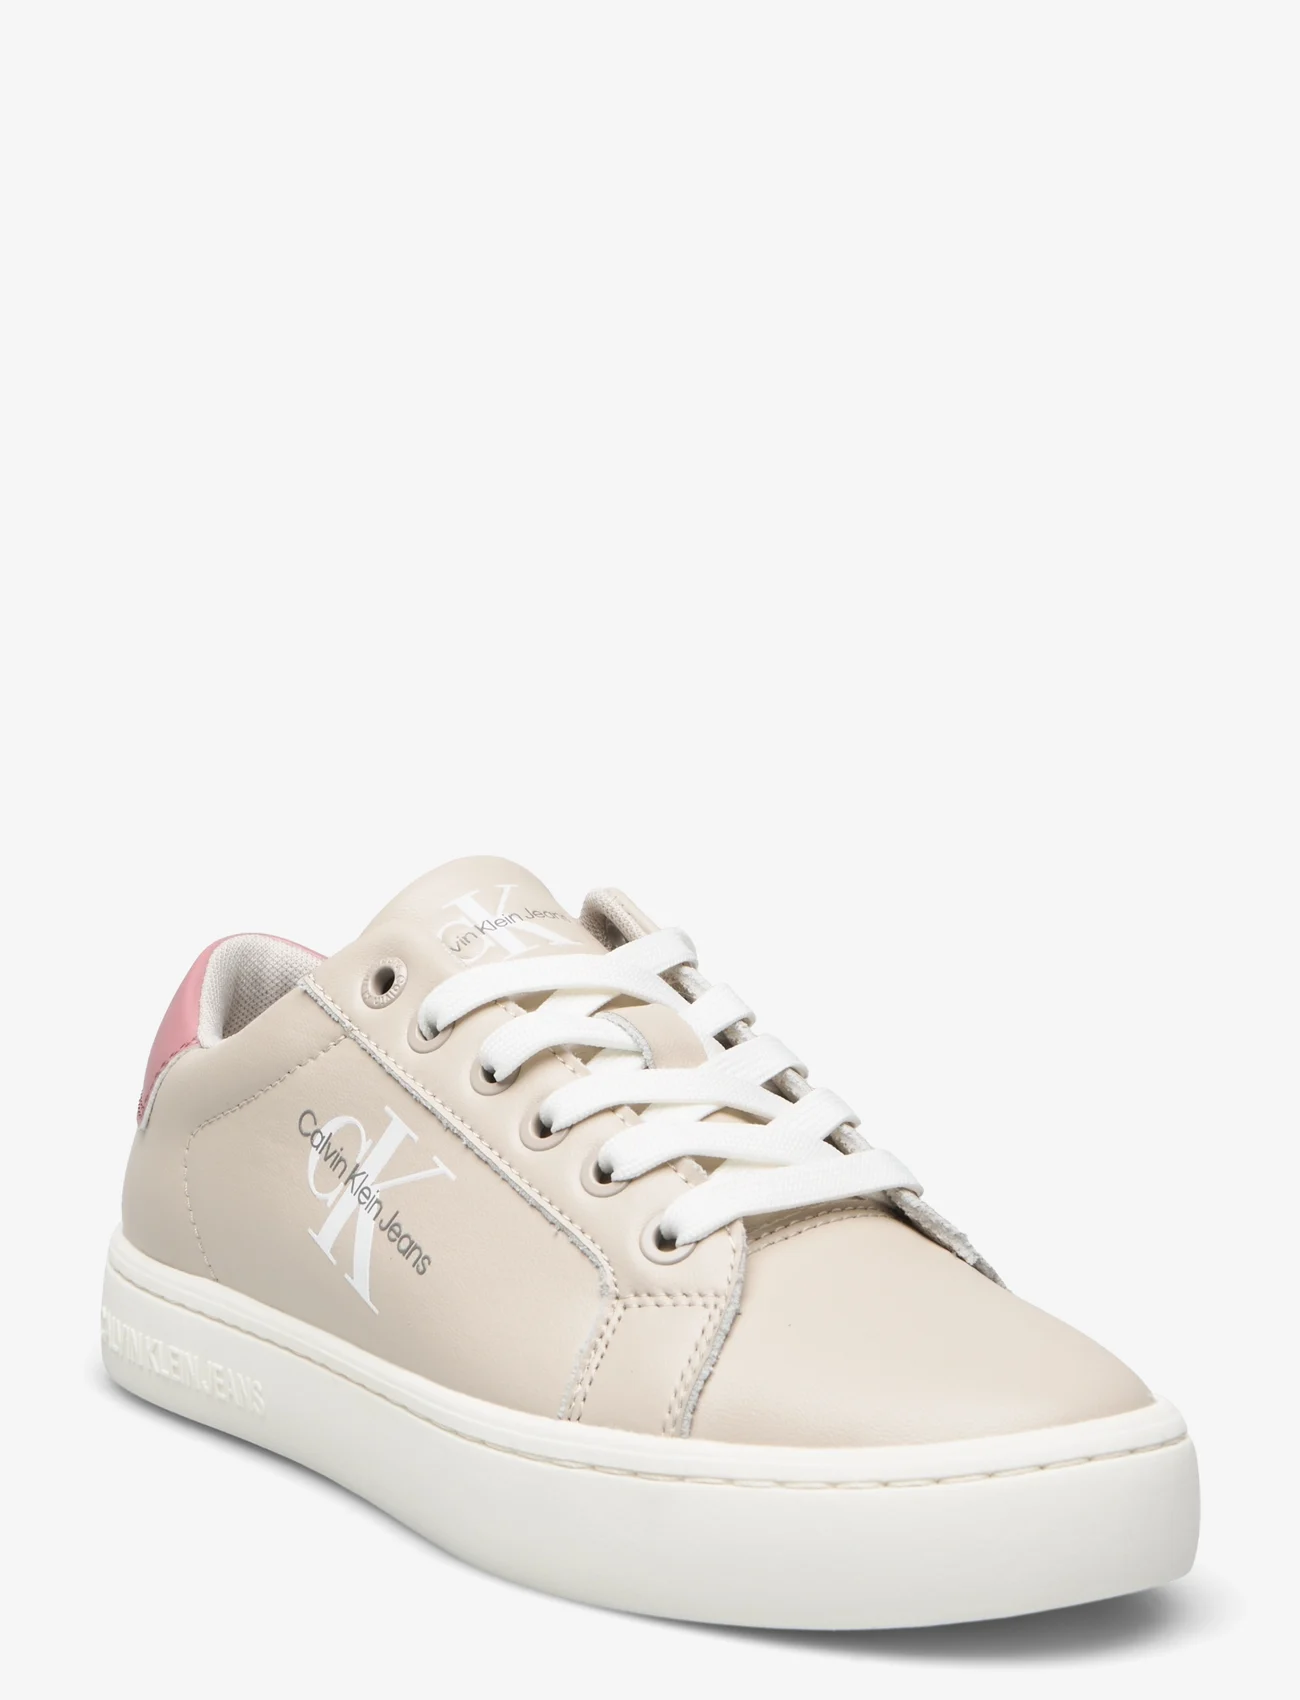 Calvin Klein - CLASSIC CUPSOLE LACEUP - low top sneakers - eggshell/ash rose - 0